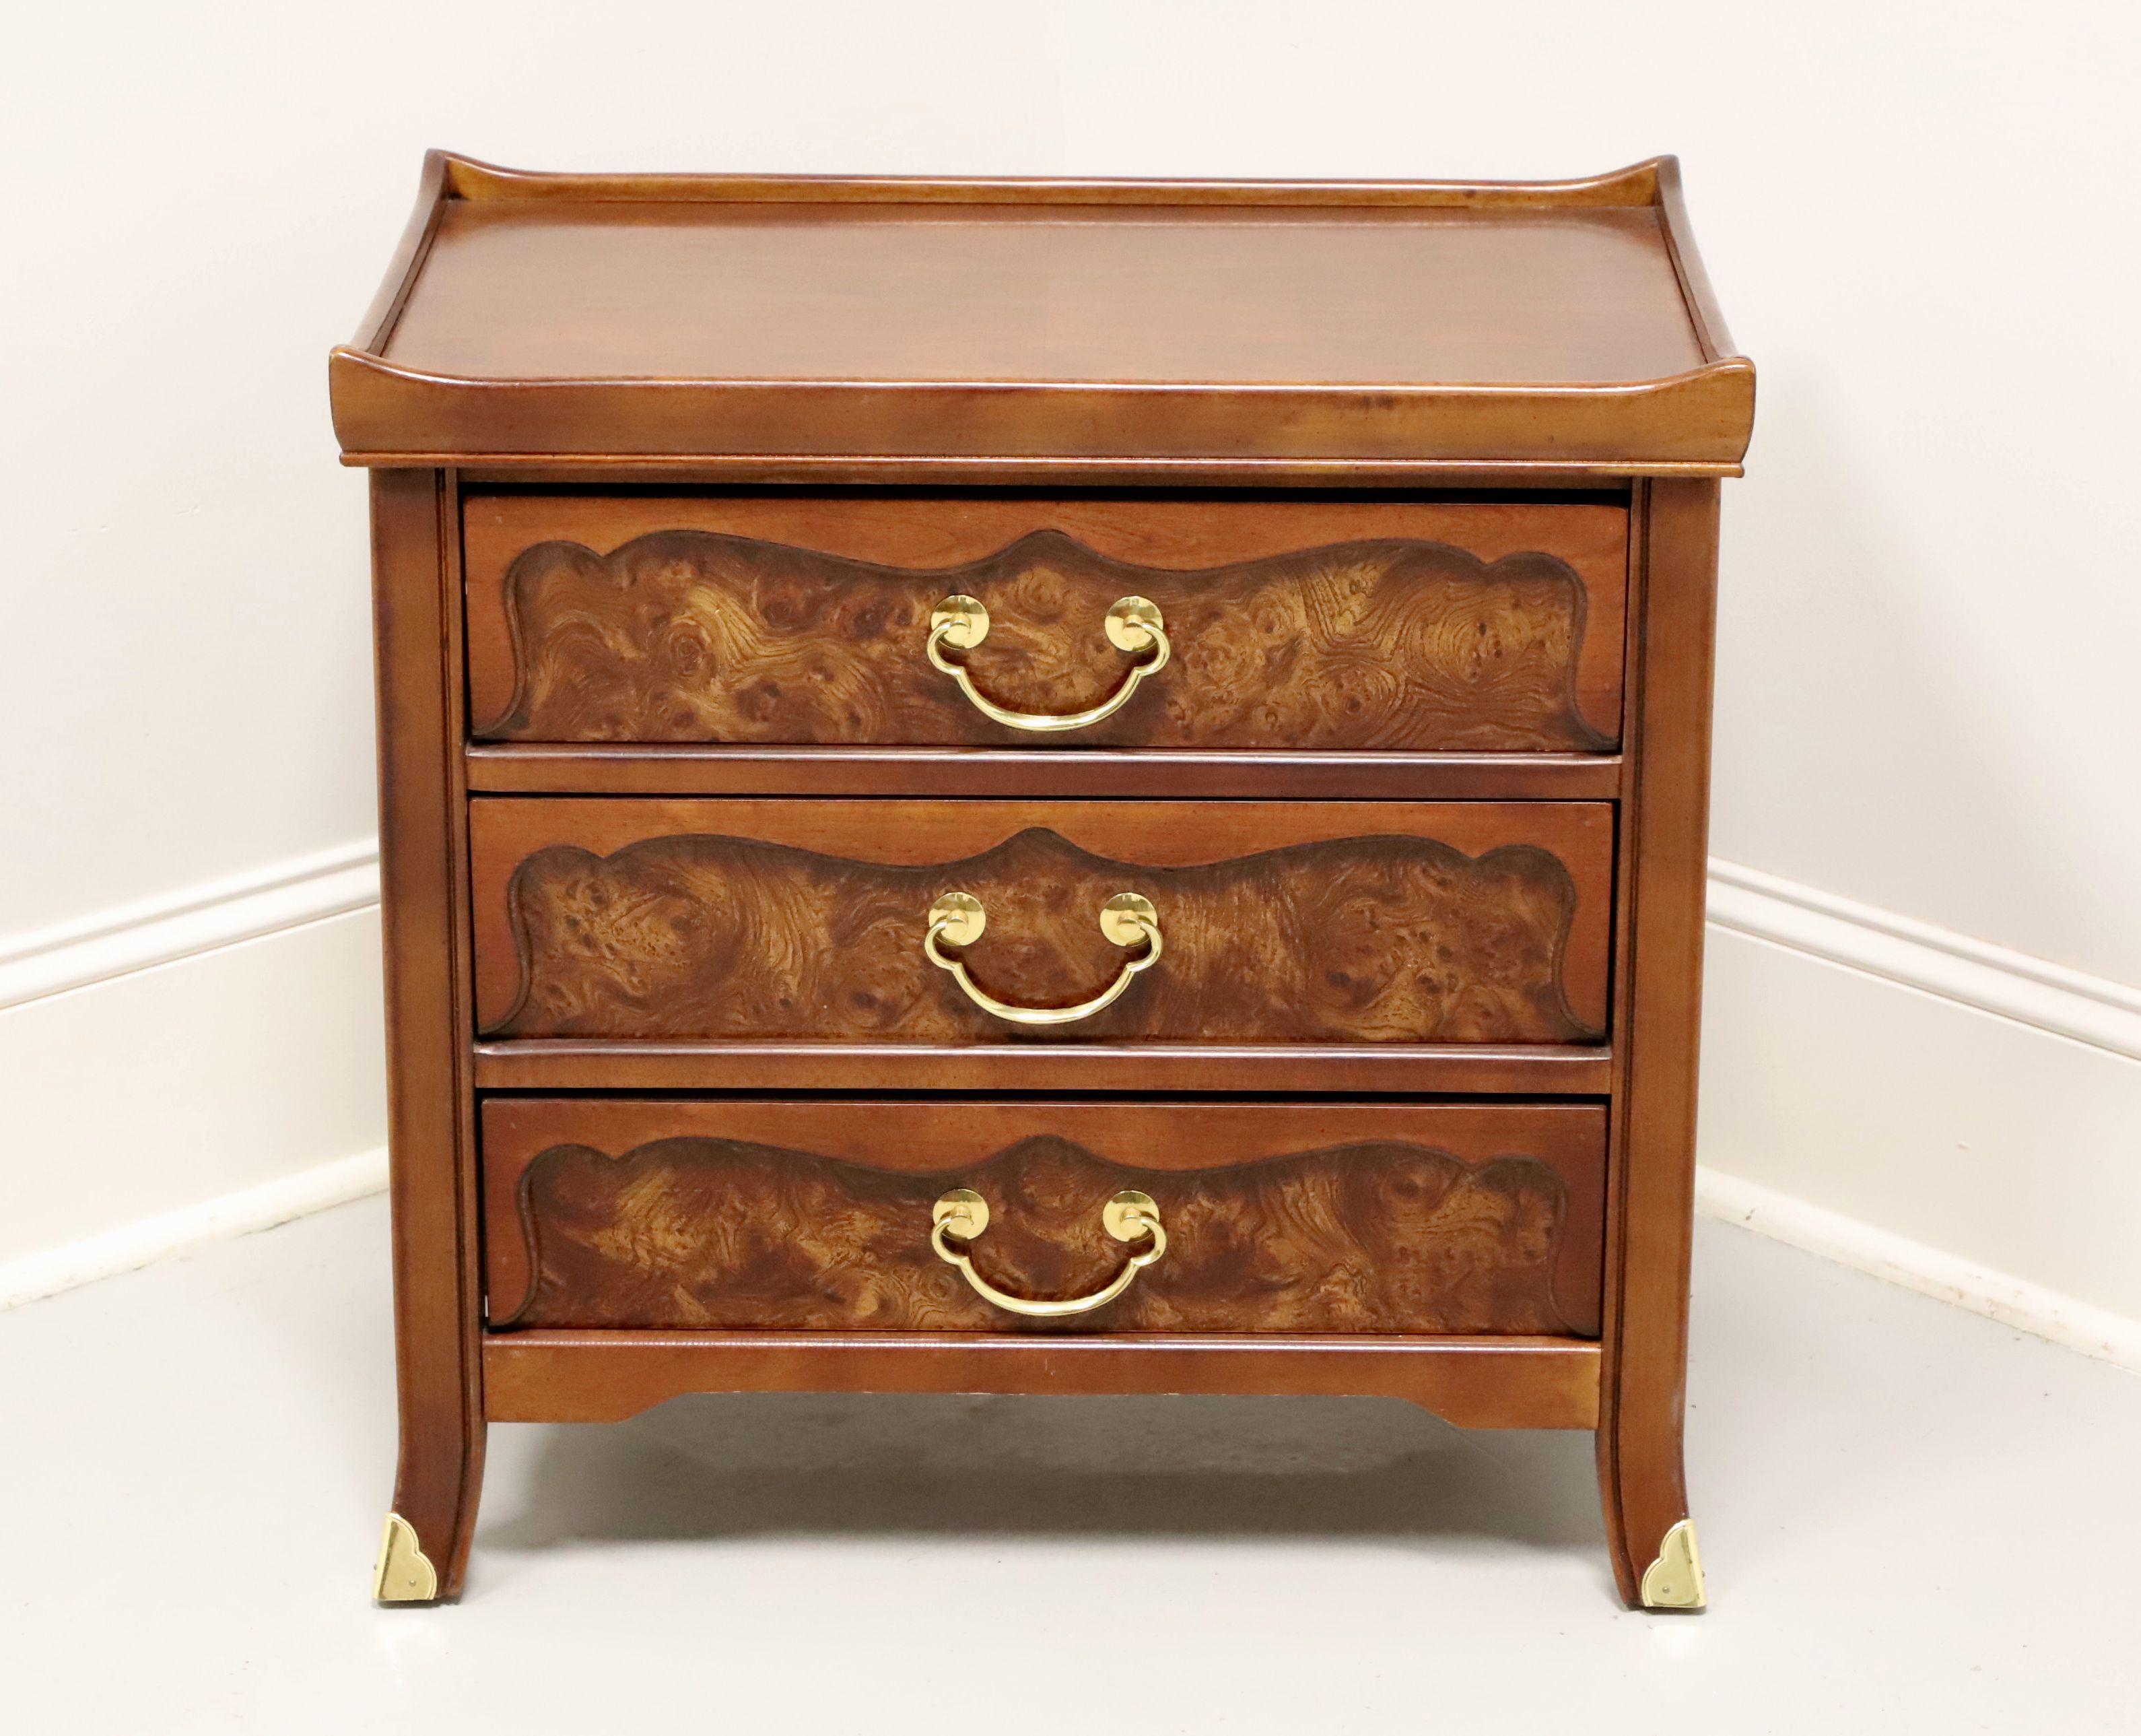 An Asian inspired nightstand, unbranded, similar quality to Henredon. Walnut with slightly distressed finish, brass hardware, raised gallery top, burlwood to drawer fronts and brass accents to feet. Features three drawers of dovetail construction.